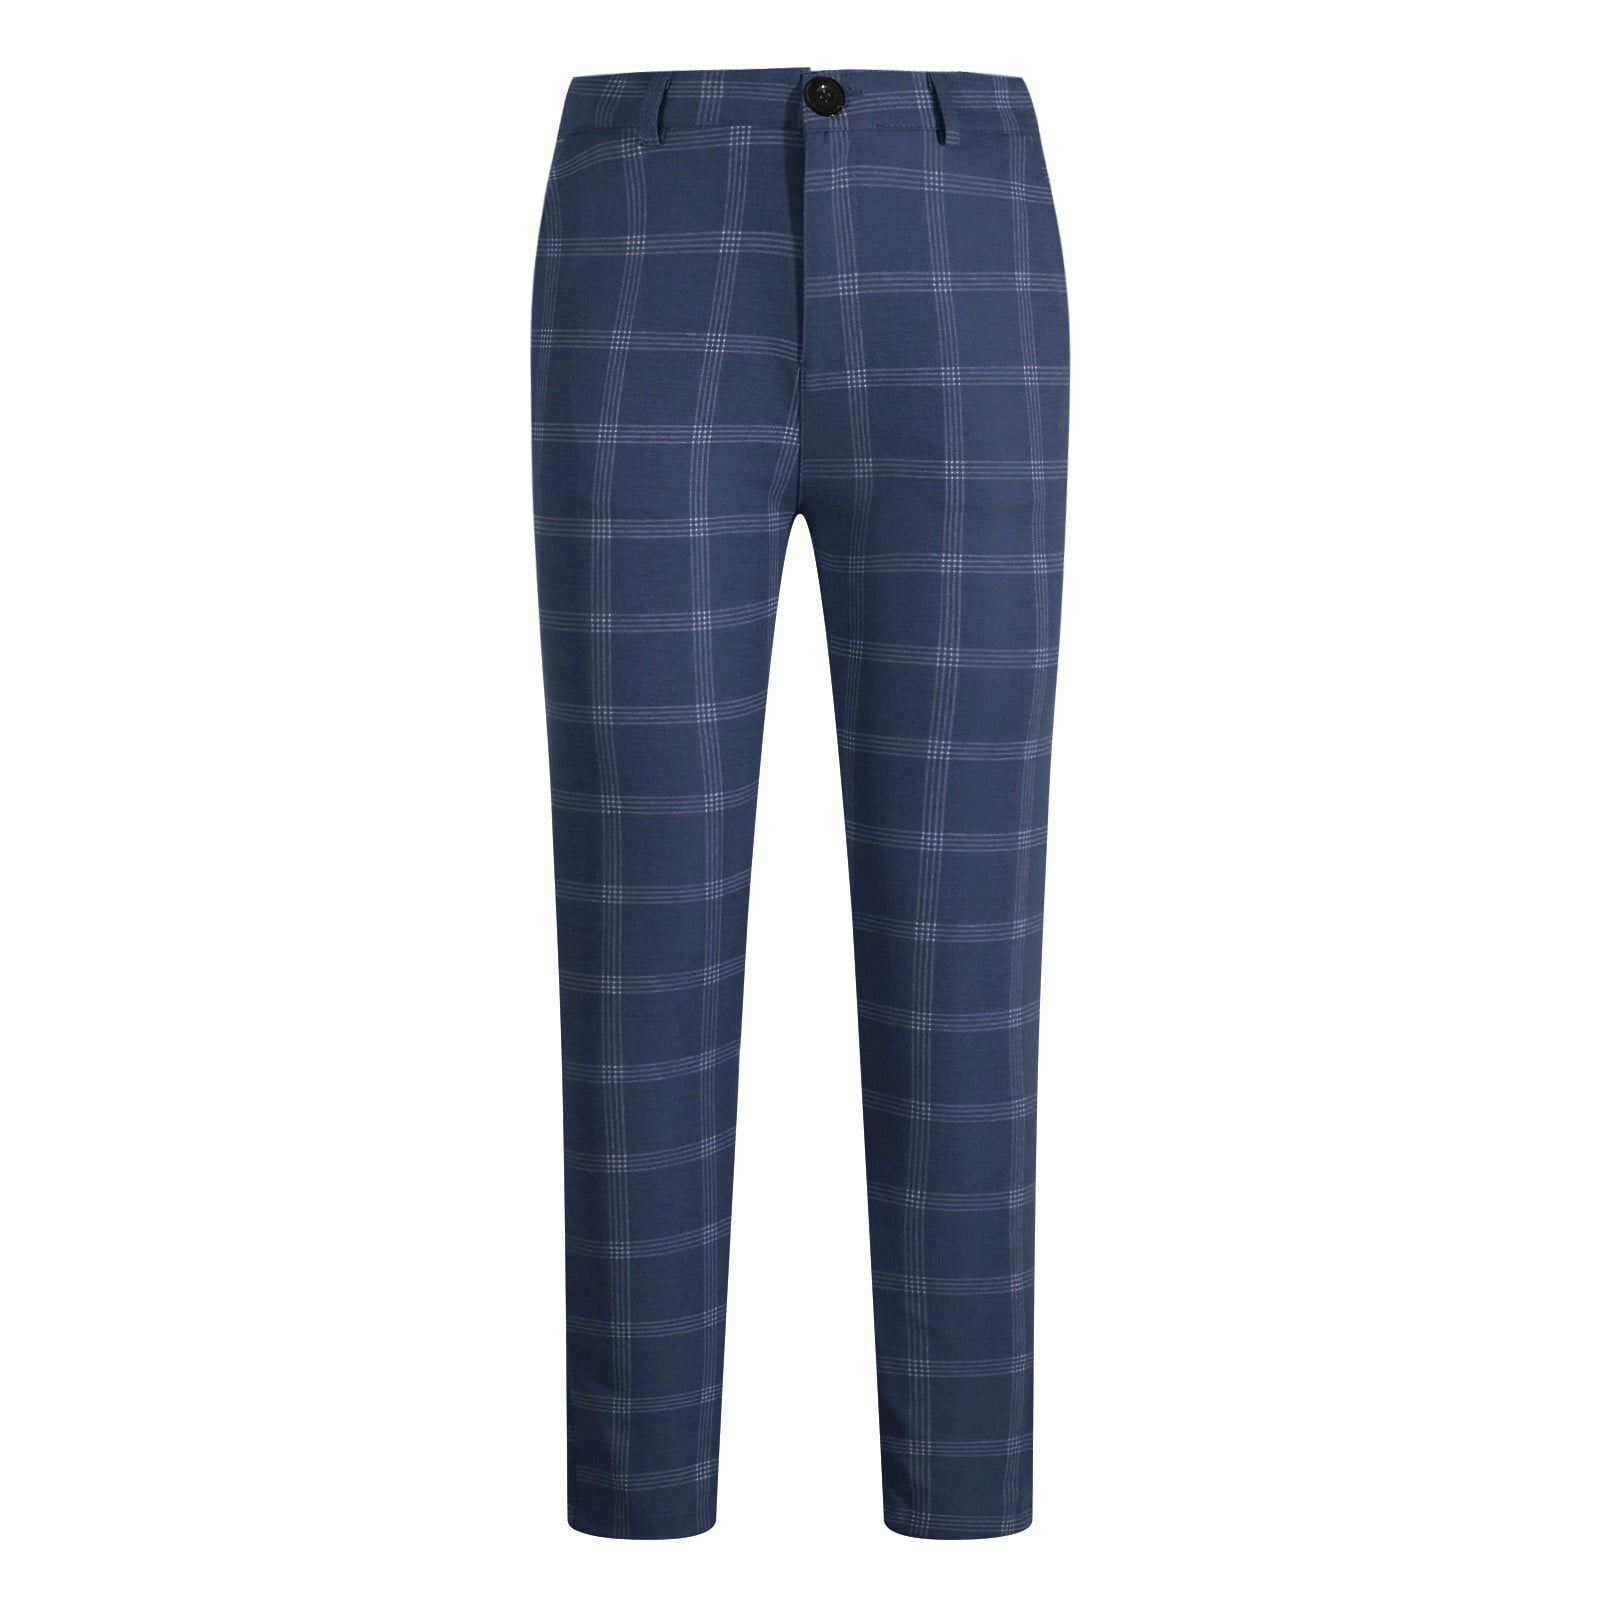 Navy Blue Plaid wool blend high waisted pleated Dress Pants | Sumissura